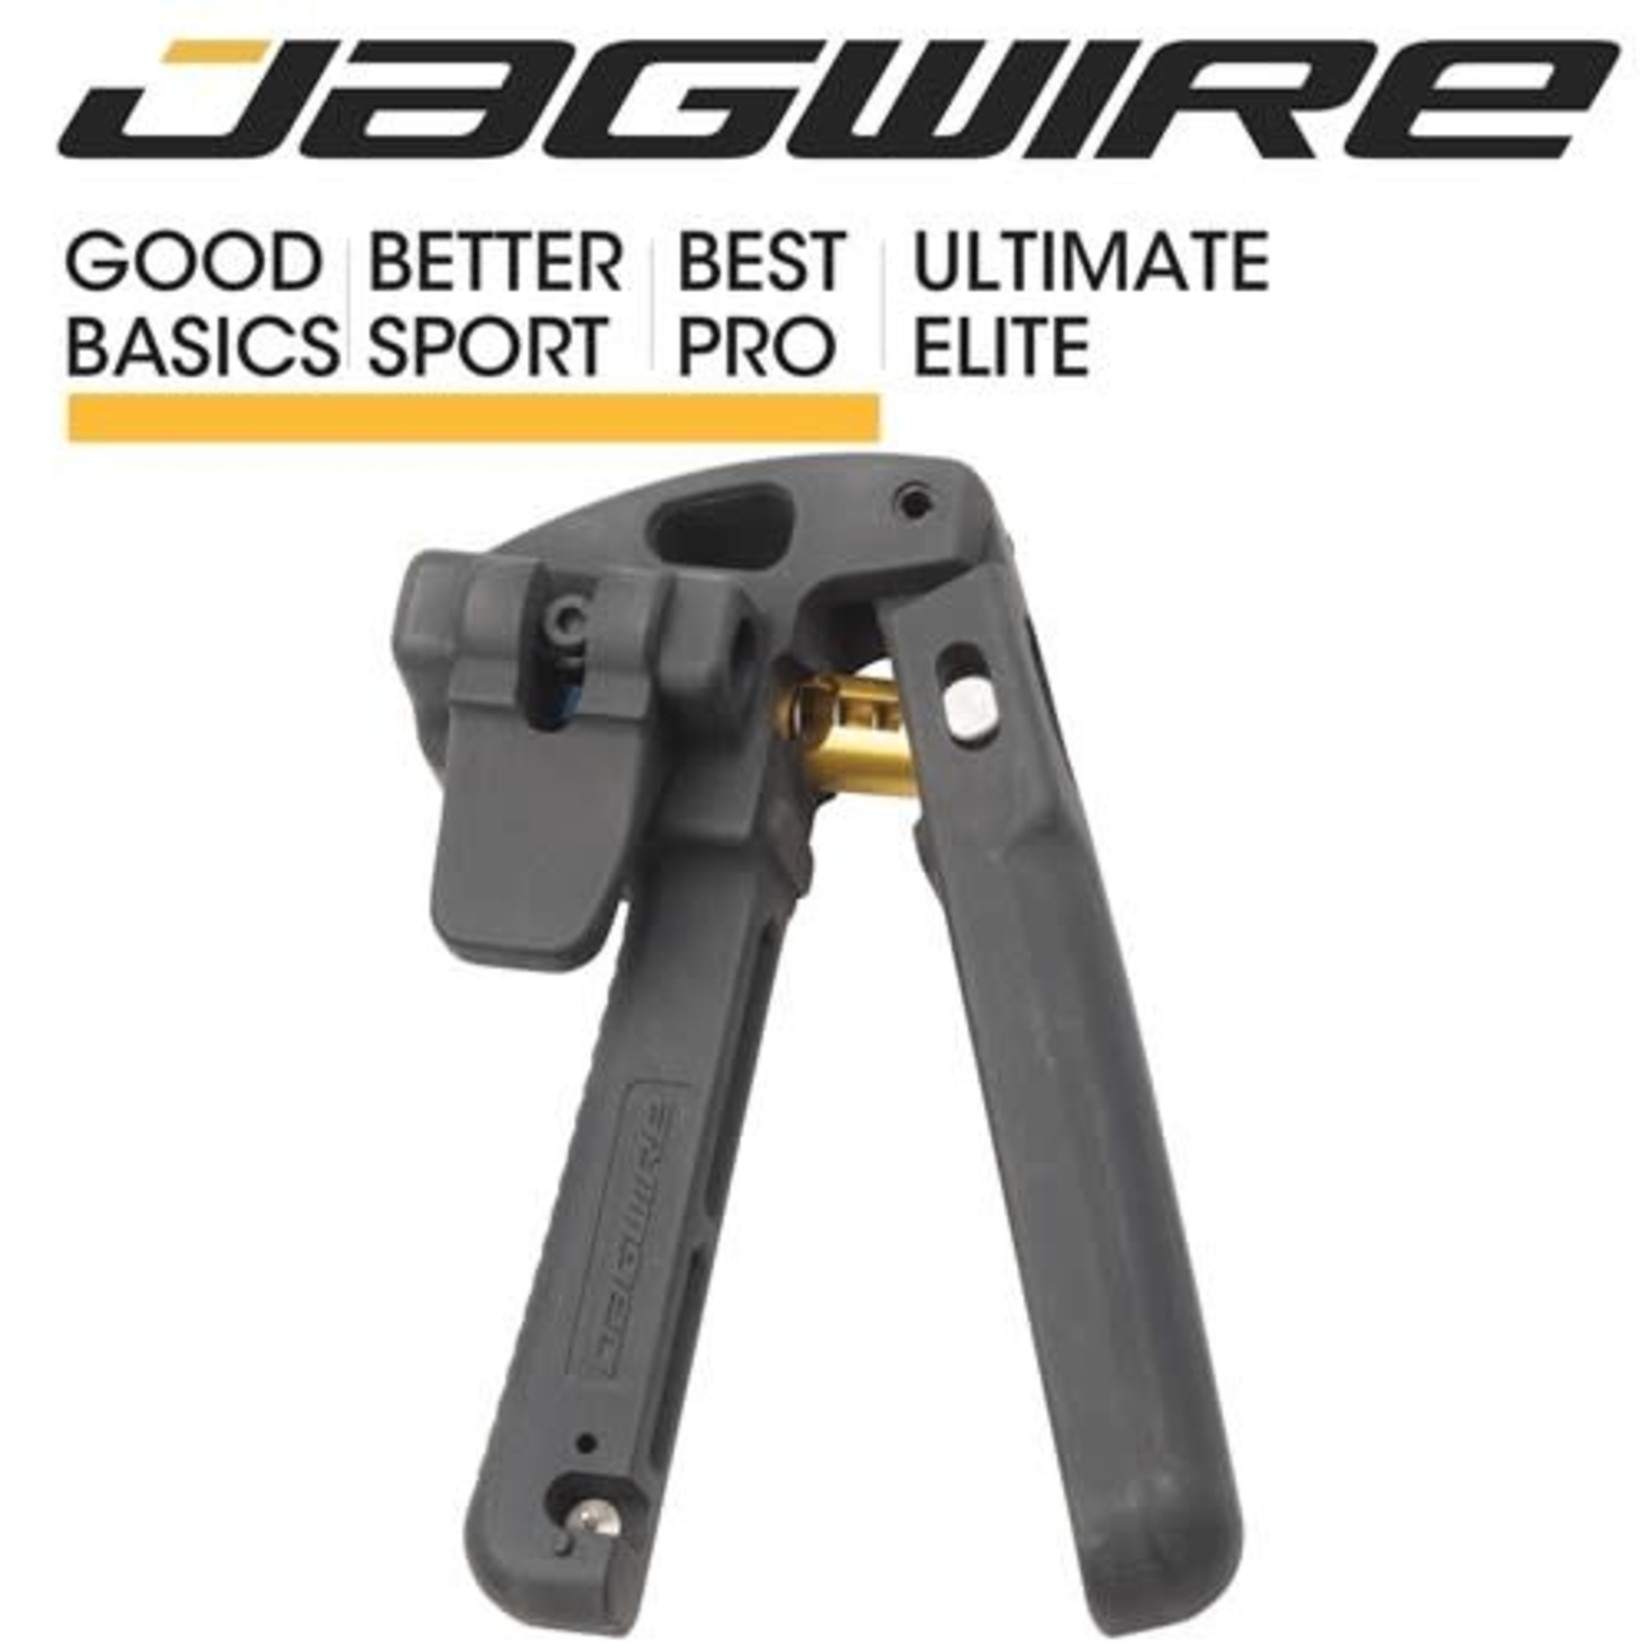 Jagwire Jagwire Pro Needle Driver For use With Unthreaded Needle Inserts